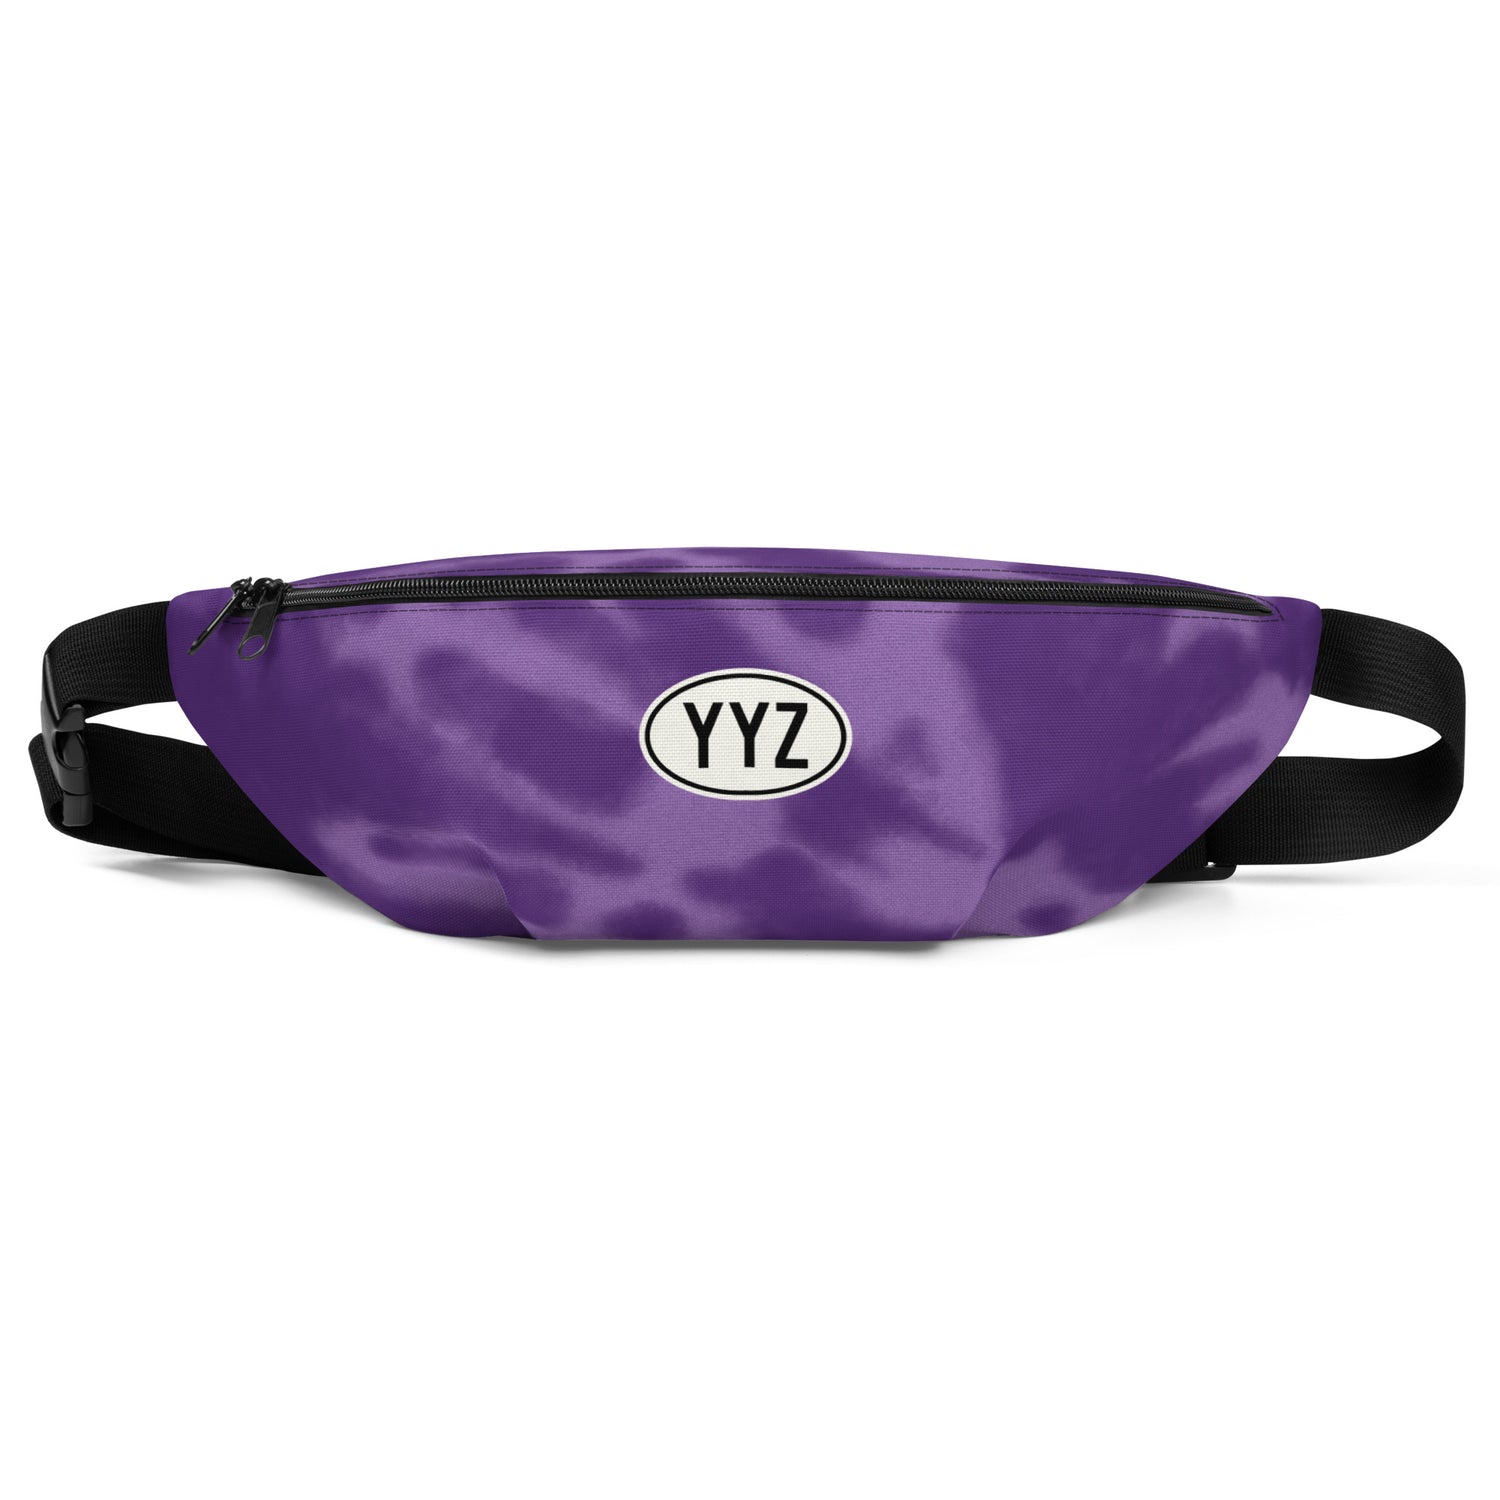 Toronto Ontario Backpacks, Fanny Packs and Tote Bags • YYZ Airport Code